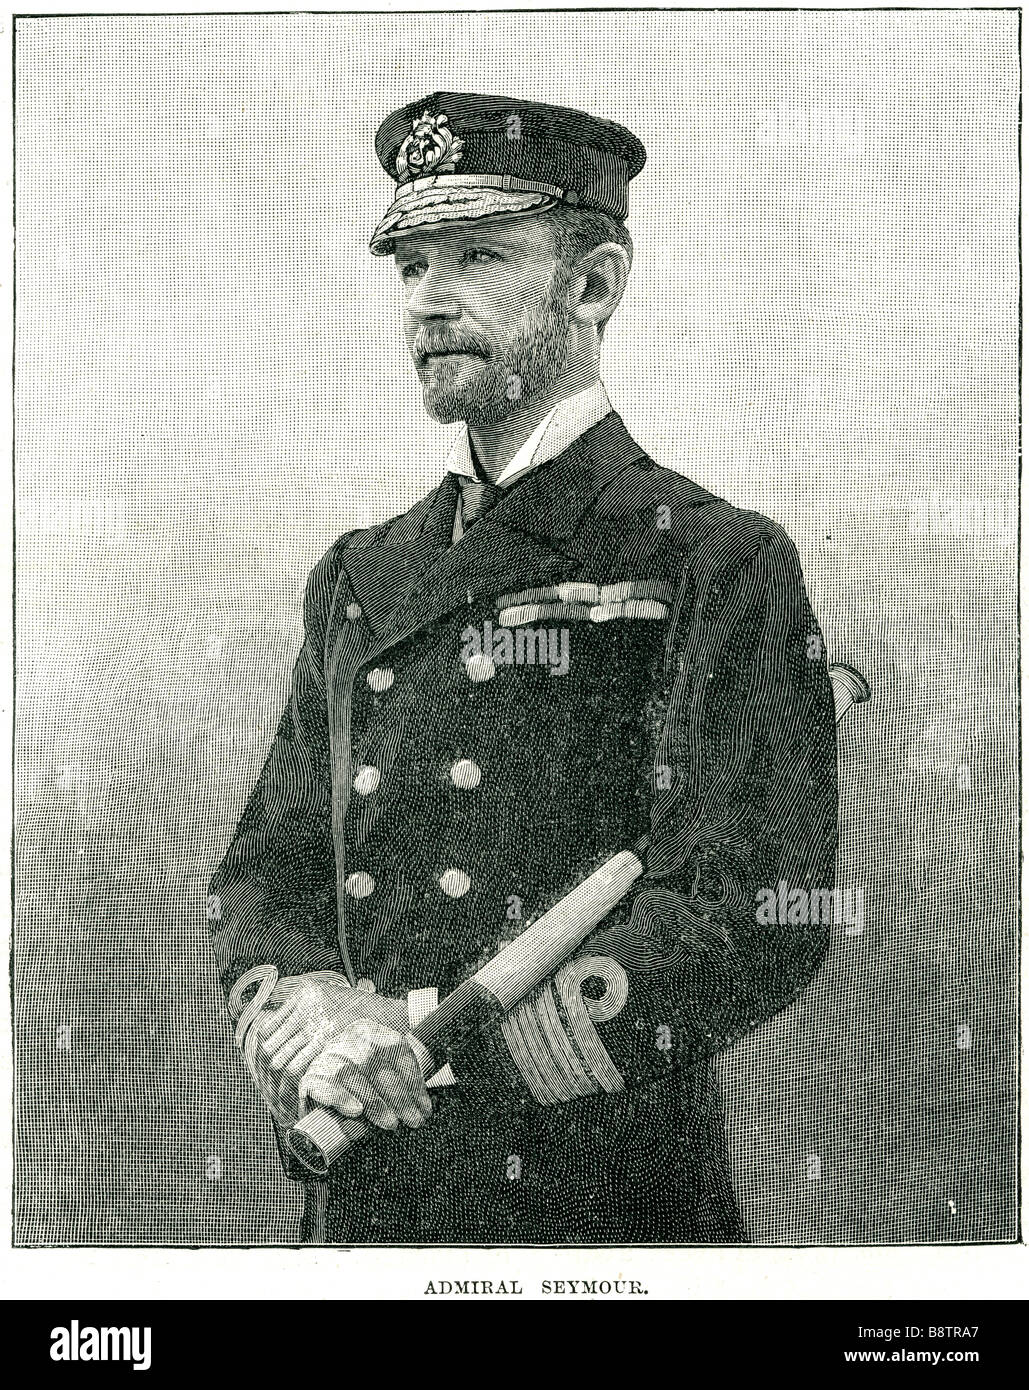 Admiral Seymour Admiral of the Fleet Sir Edward Hobart Seymour GCB OM RN (30 April 1840–2 March 1929) was a British Admiral of t Stock Photo